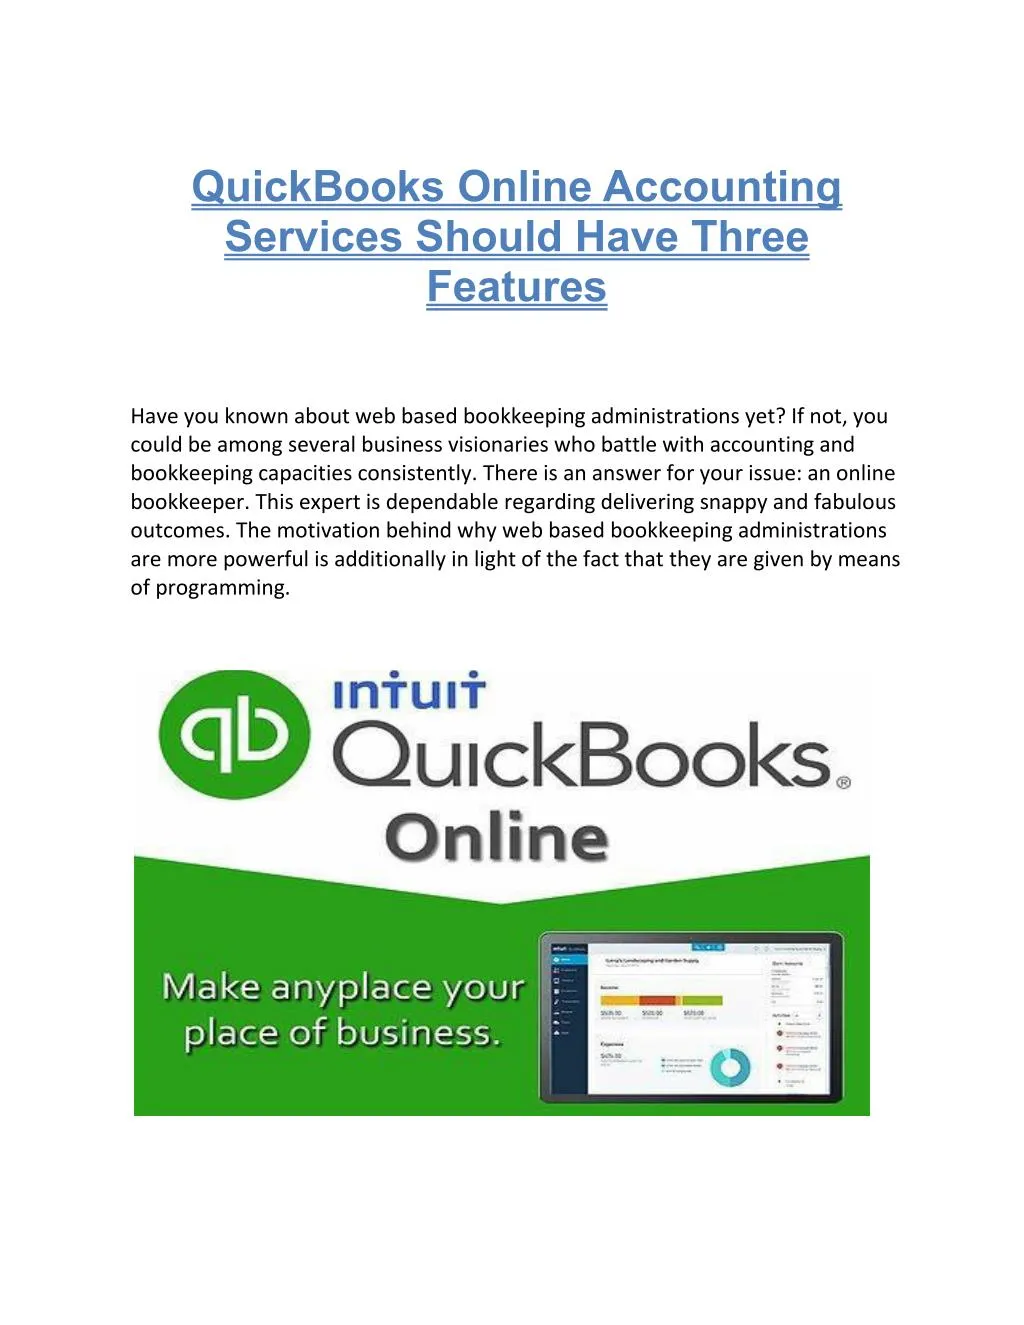 quickbooks online accounting services should have